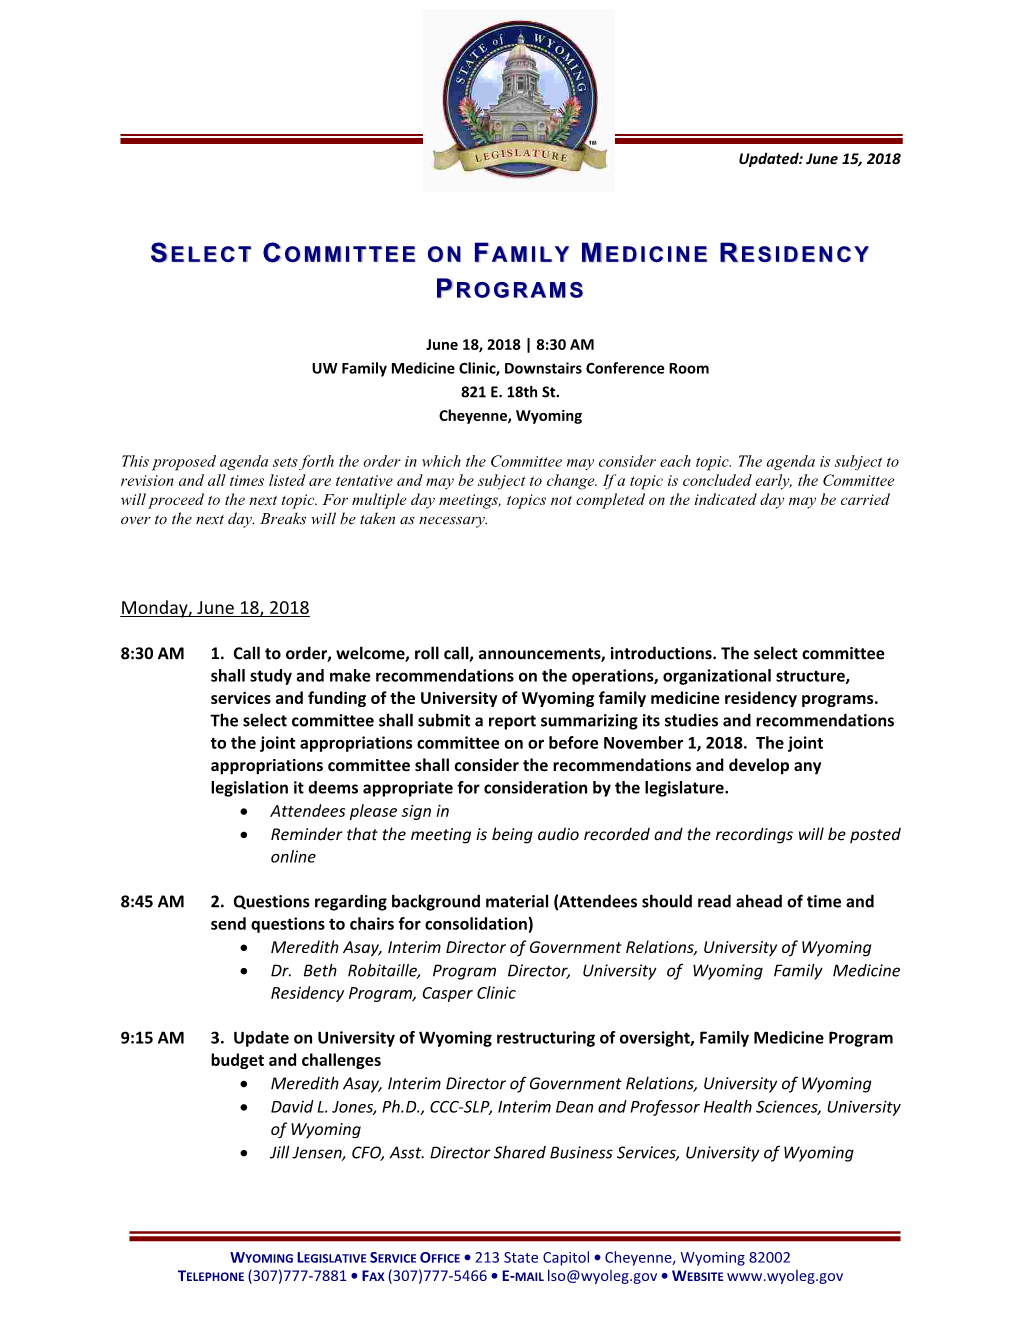 Select Committee on Family Medicine Residency Programs